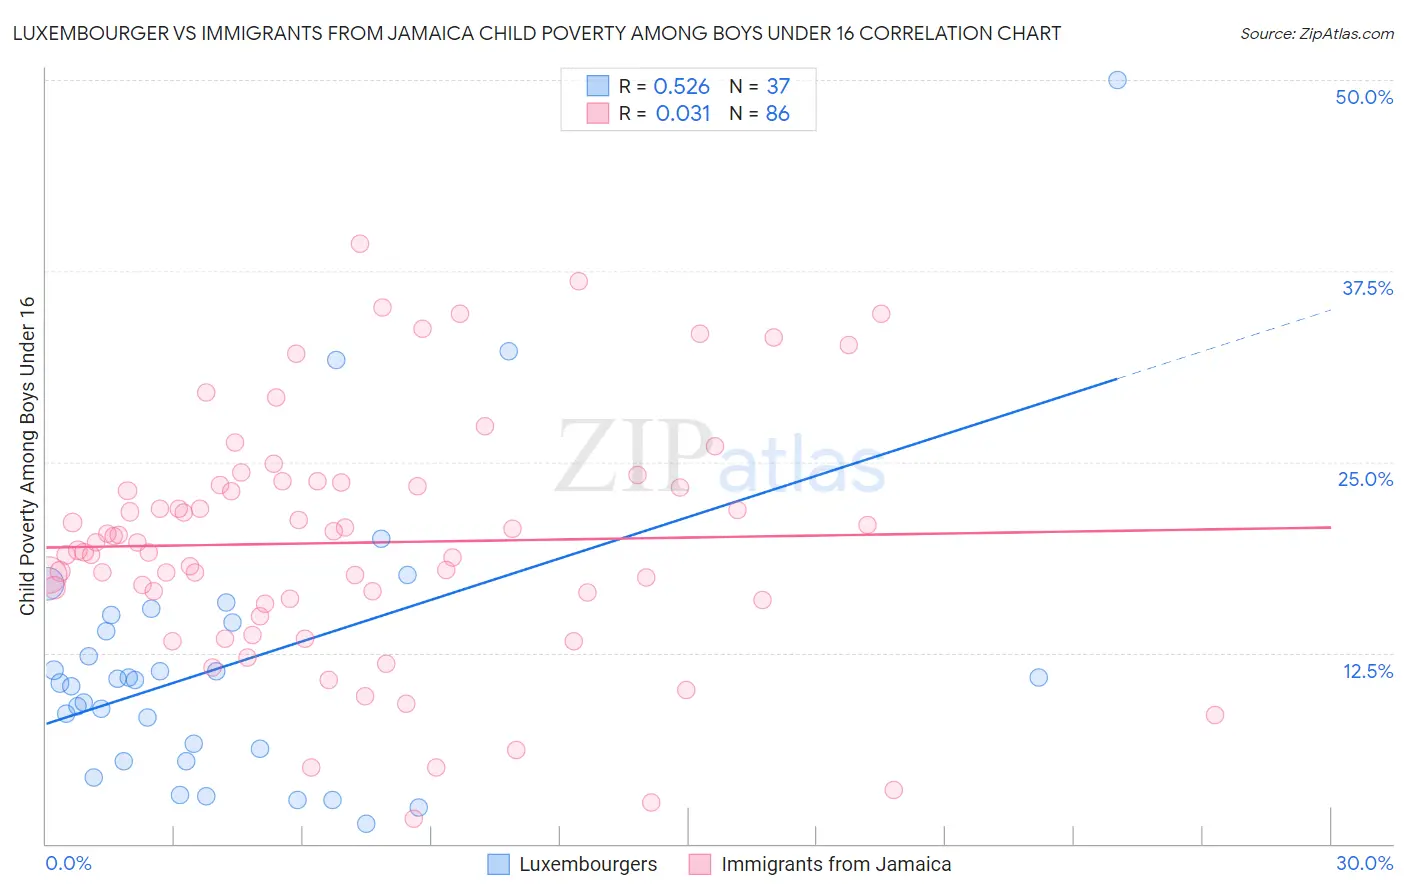 Luxembourger vs Immigrants from Jamaica Child Poverty Among Boys Under 16